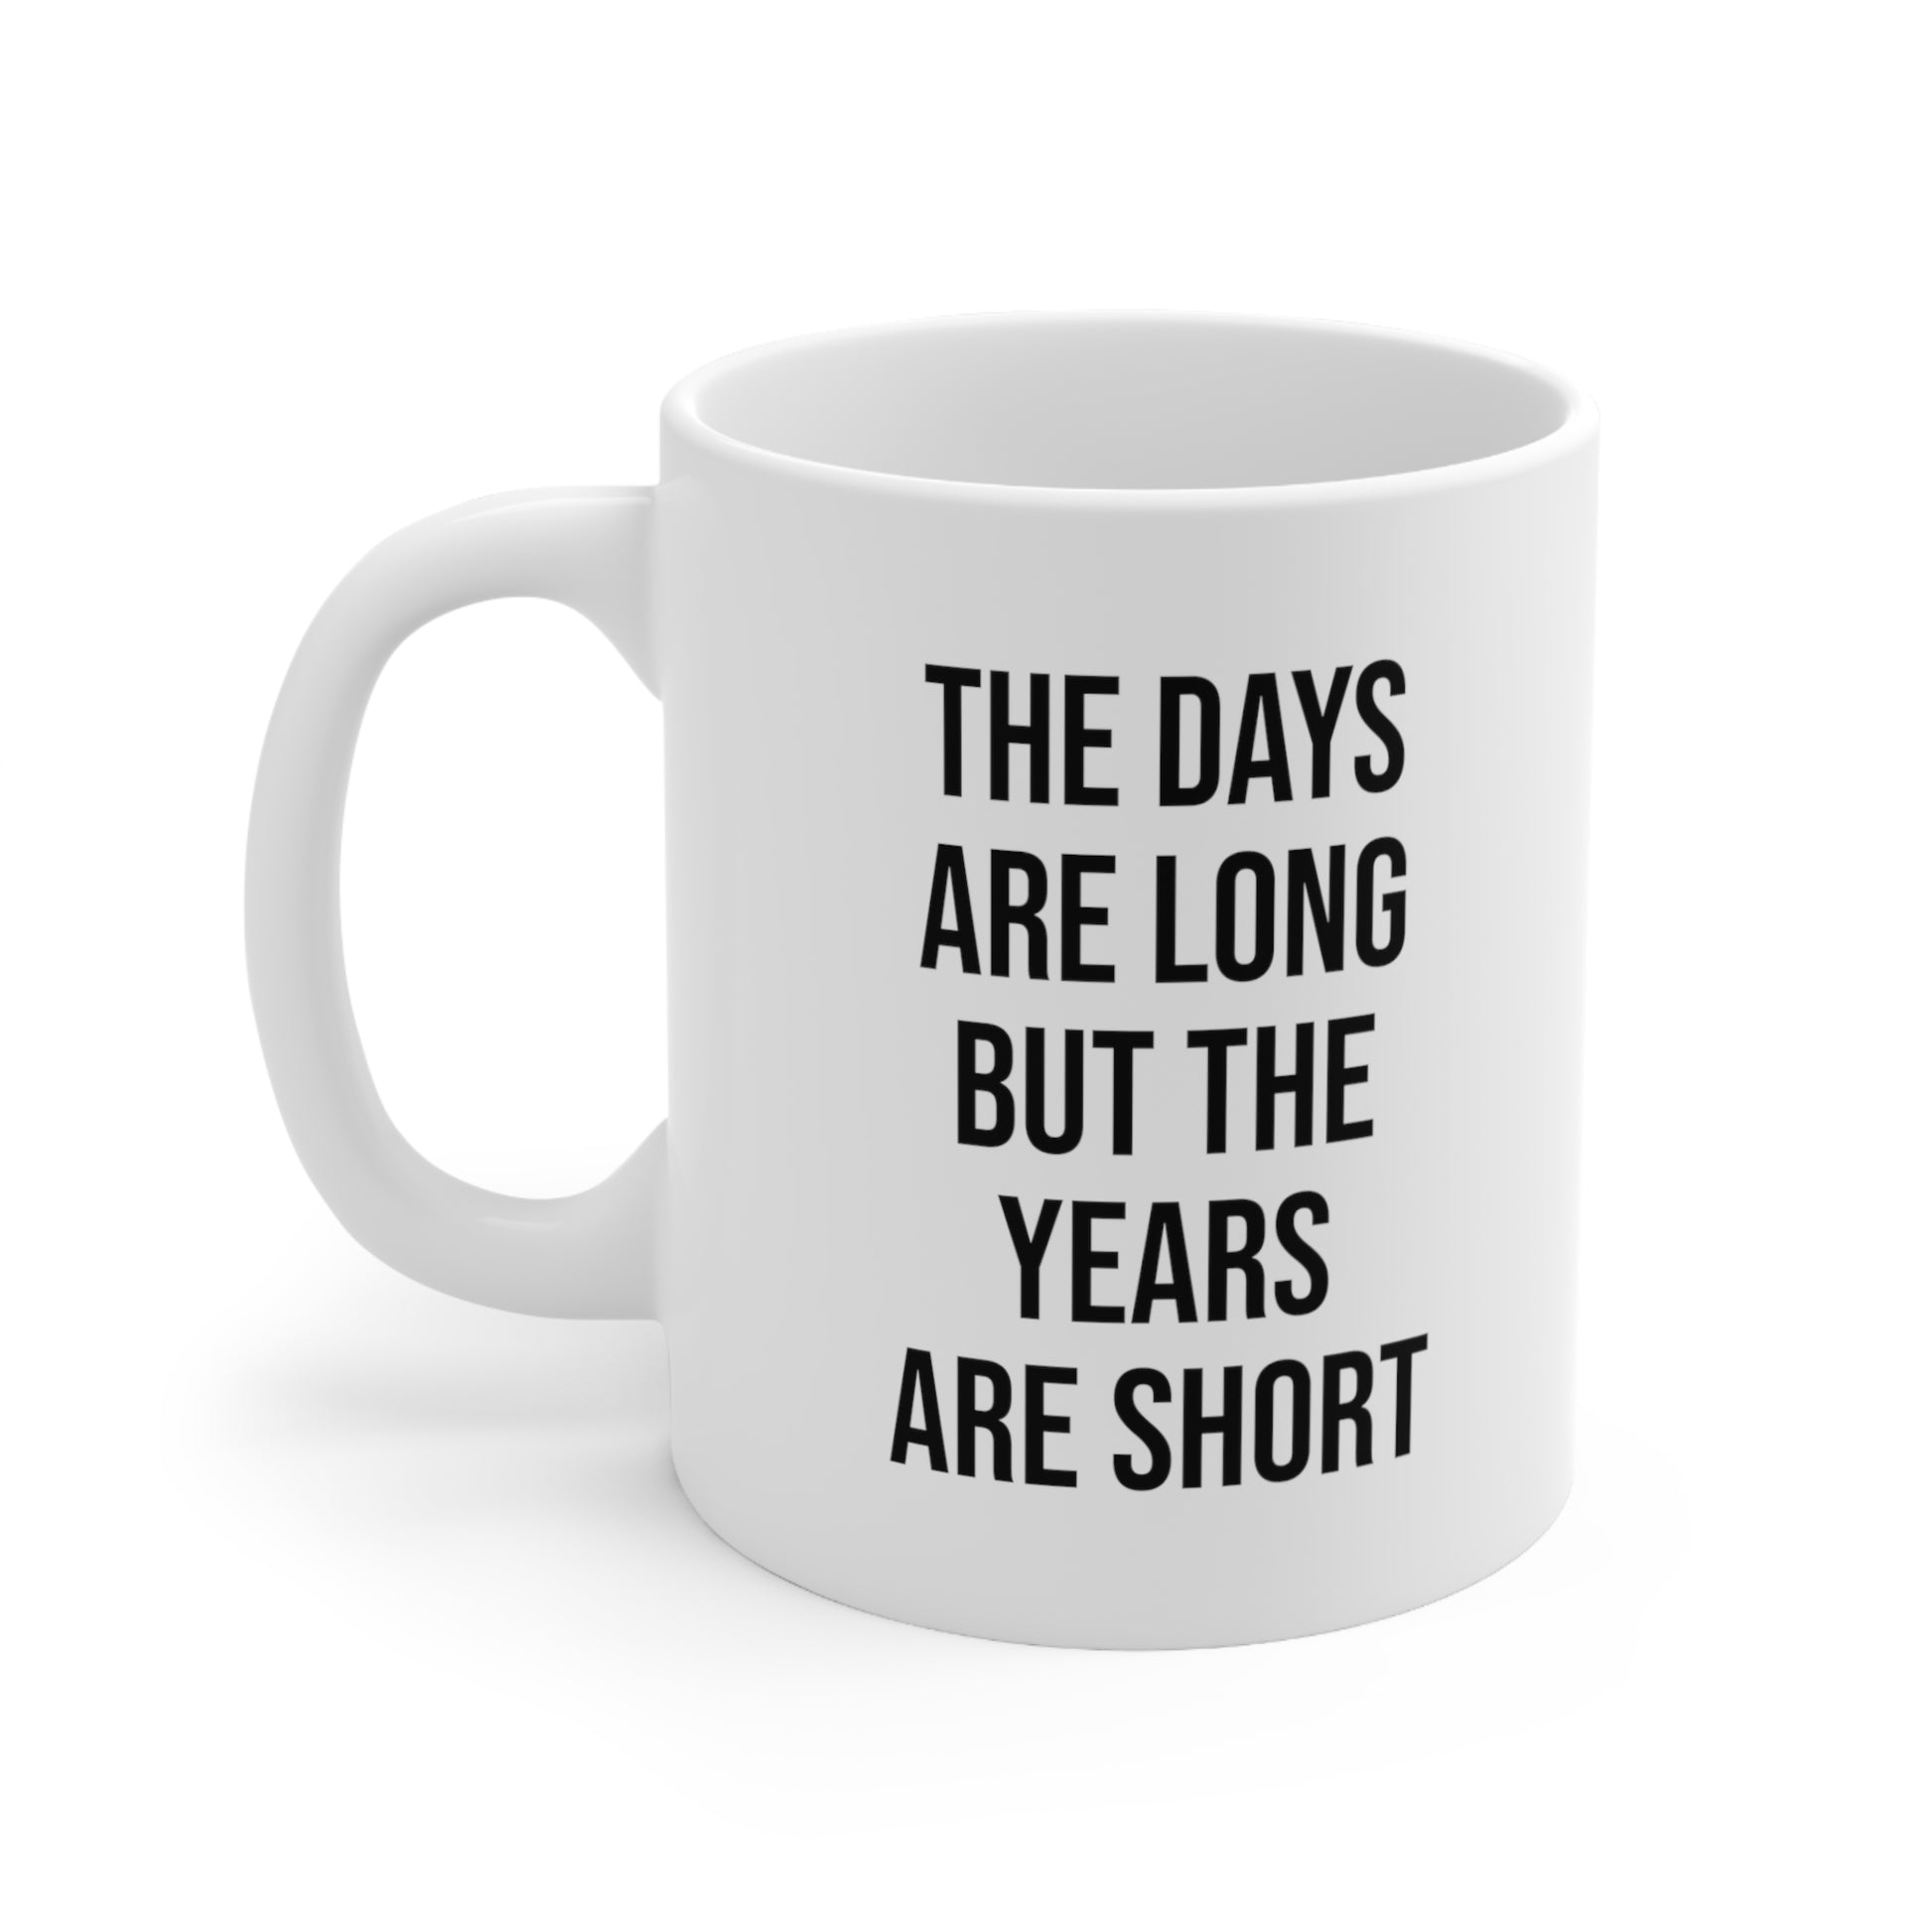 The Days Are Long But The Years Are Short Coffee Mug